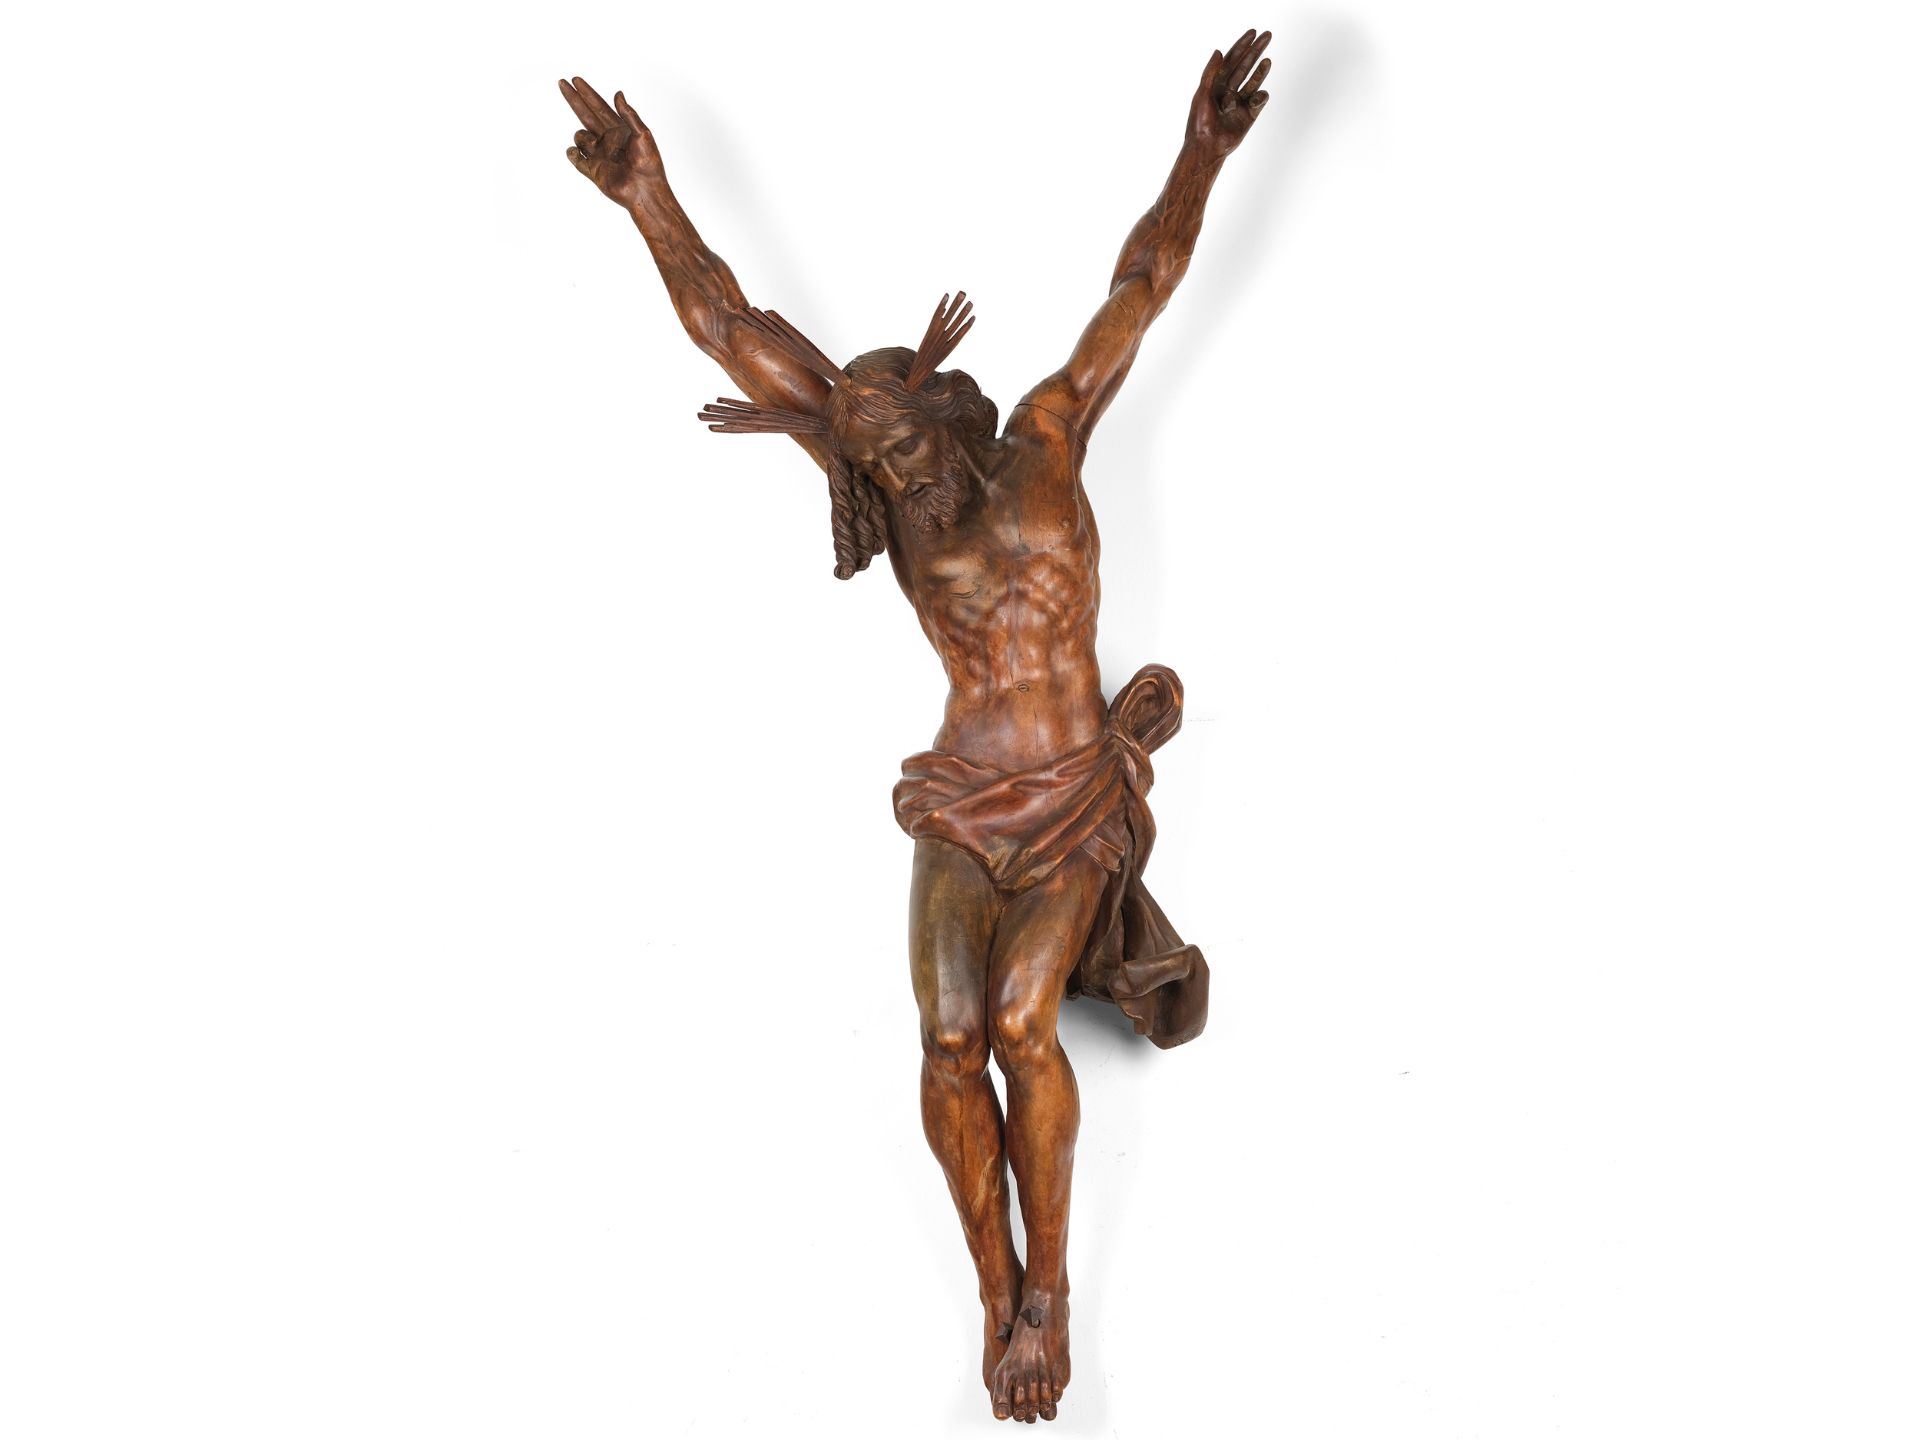 Christ with cross nimbus, In the style of the 17th/18th century, Carved lime wood